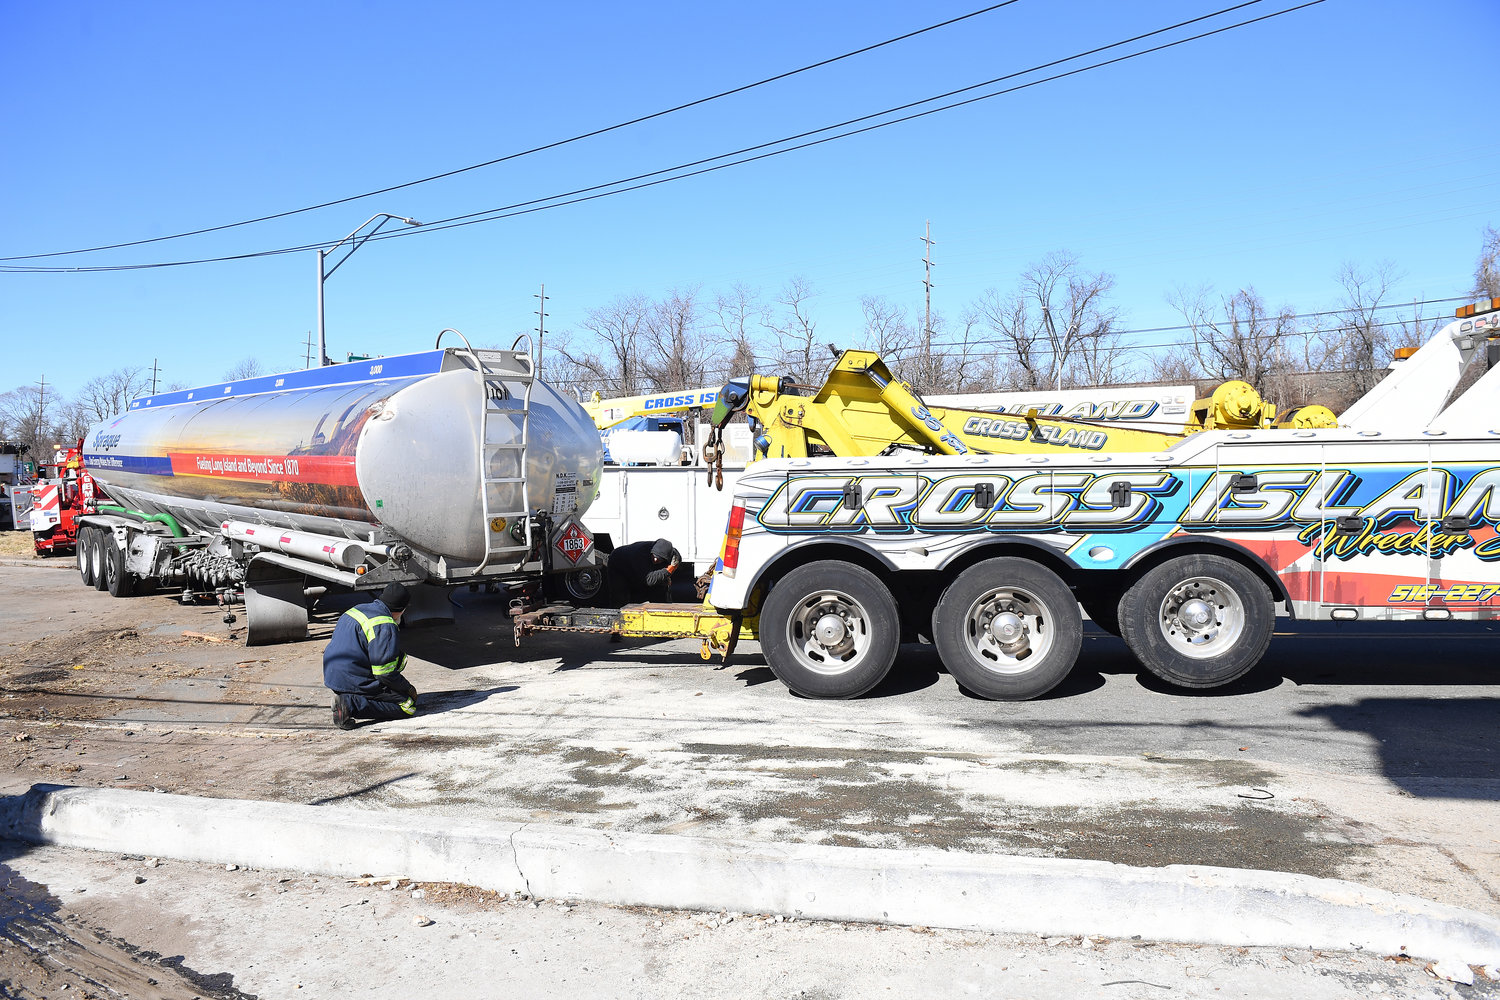 A tractor trailer from Sprague Energy in Lawrence, traveling eastbound on Sunrise Highway, struck a potentially illegally parked car carrier early this morning in Merrick.